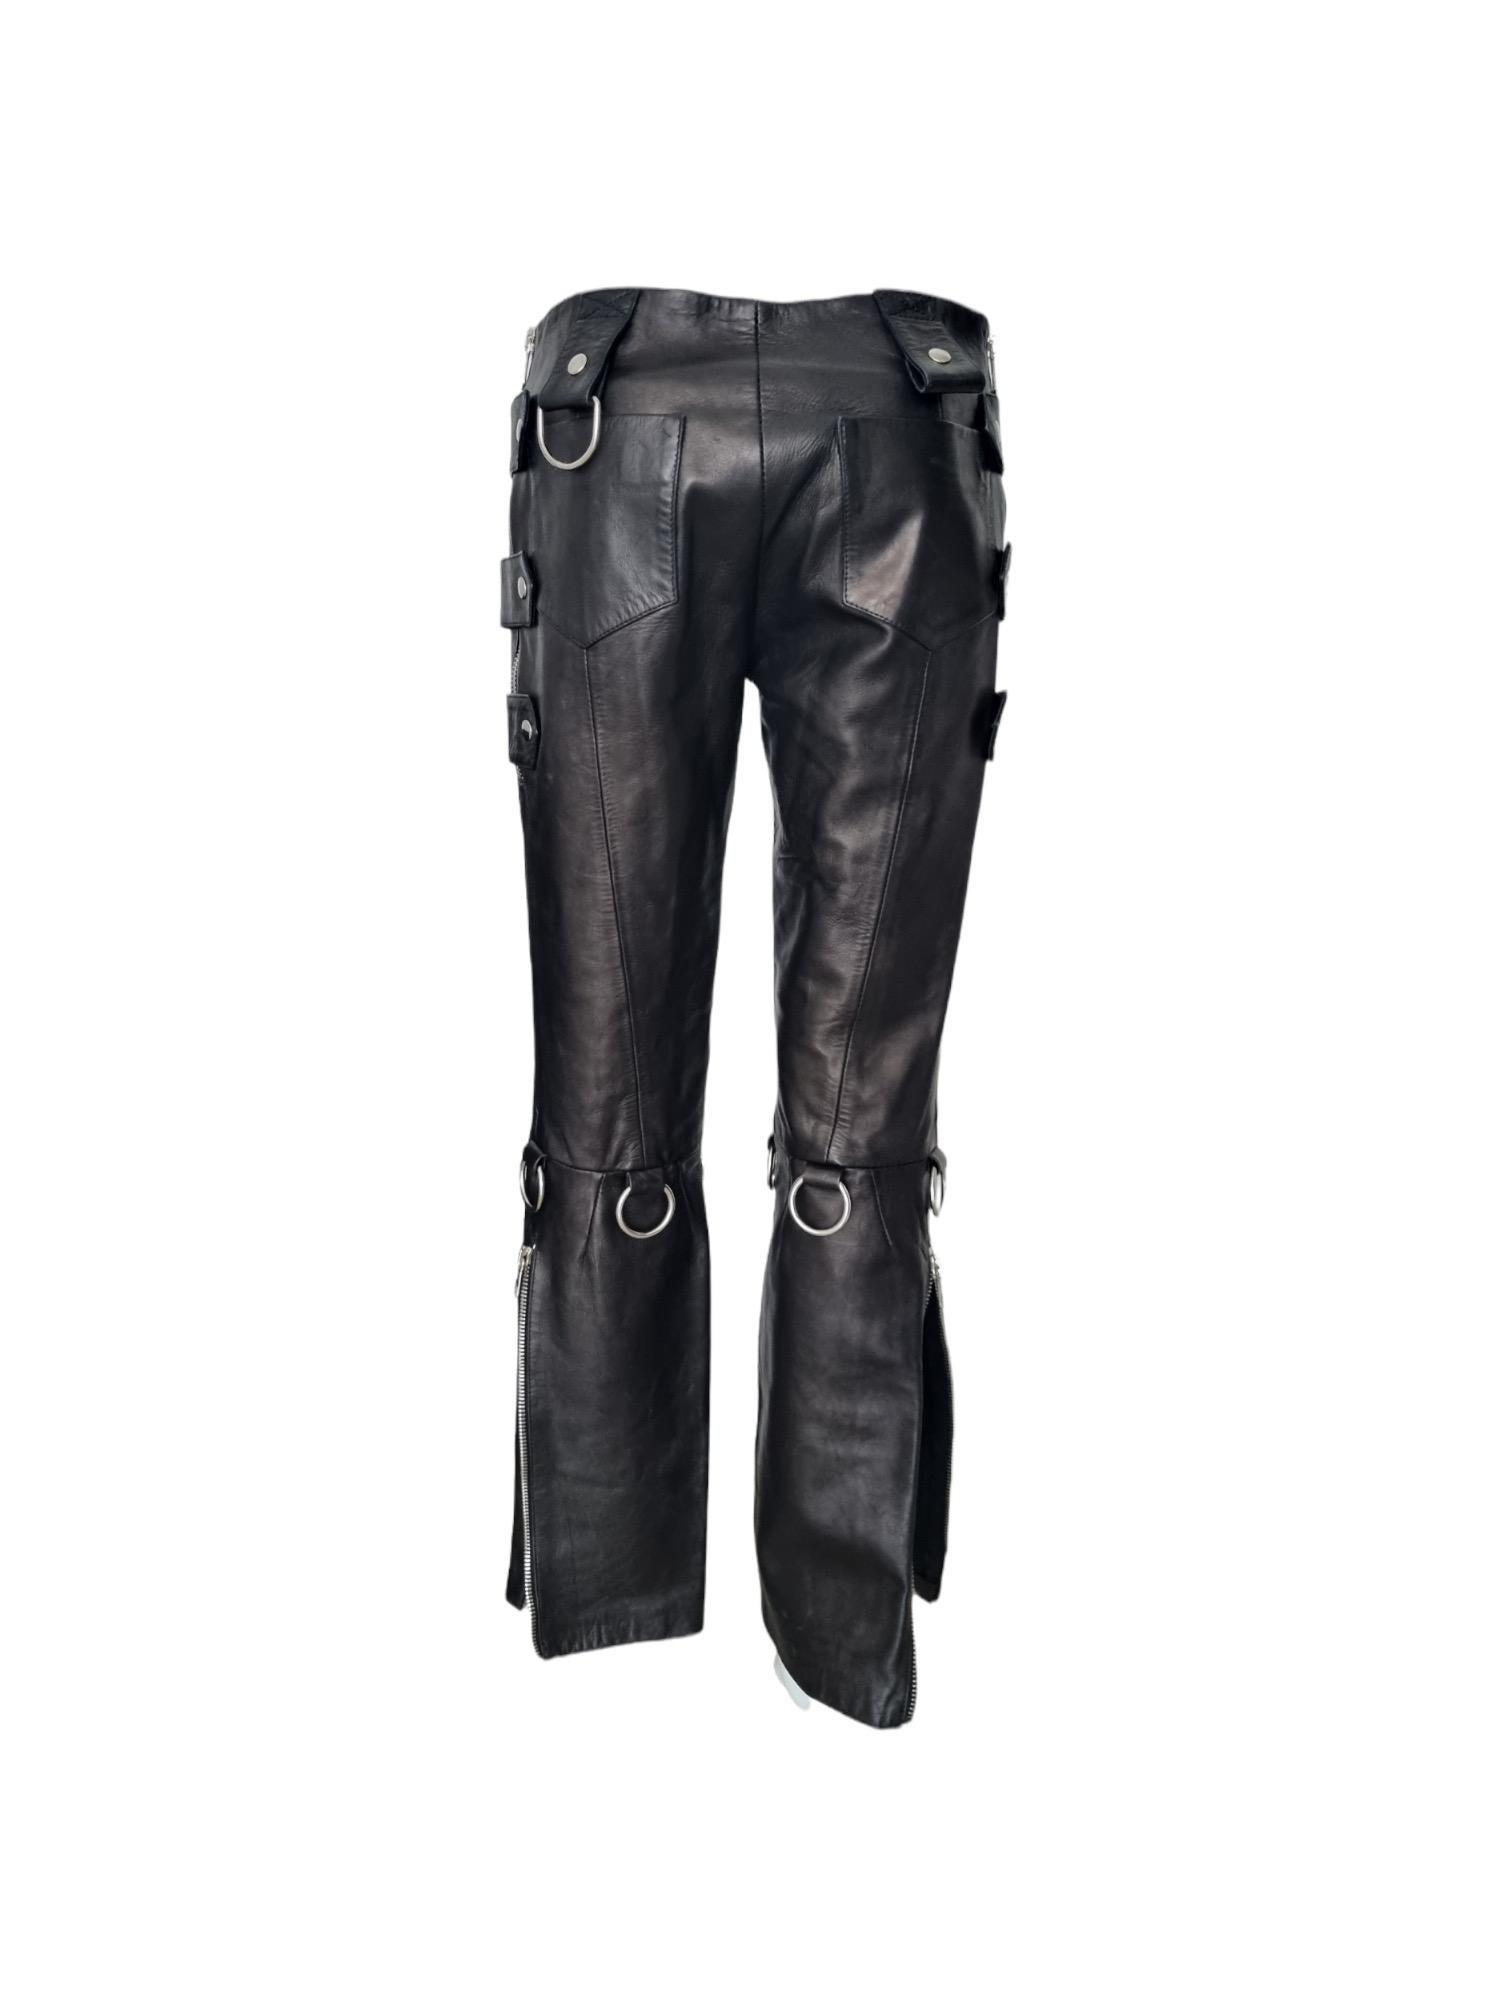 My Runway Archive presents these Iconic runway pants from the Dolce and Gabbana SS 2000 show as worn by the late pop superstar Aaliyah for her Try Again music video. 
Condition: Excellent
Material: Leather
Size: the tag state size 7 but the pants